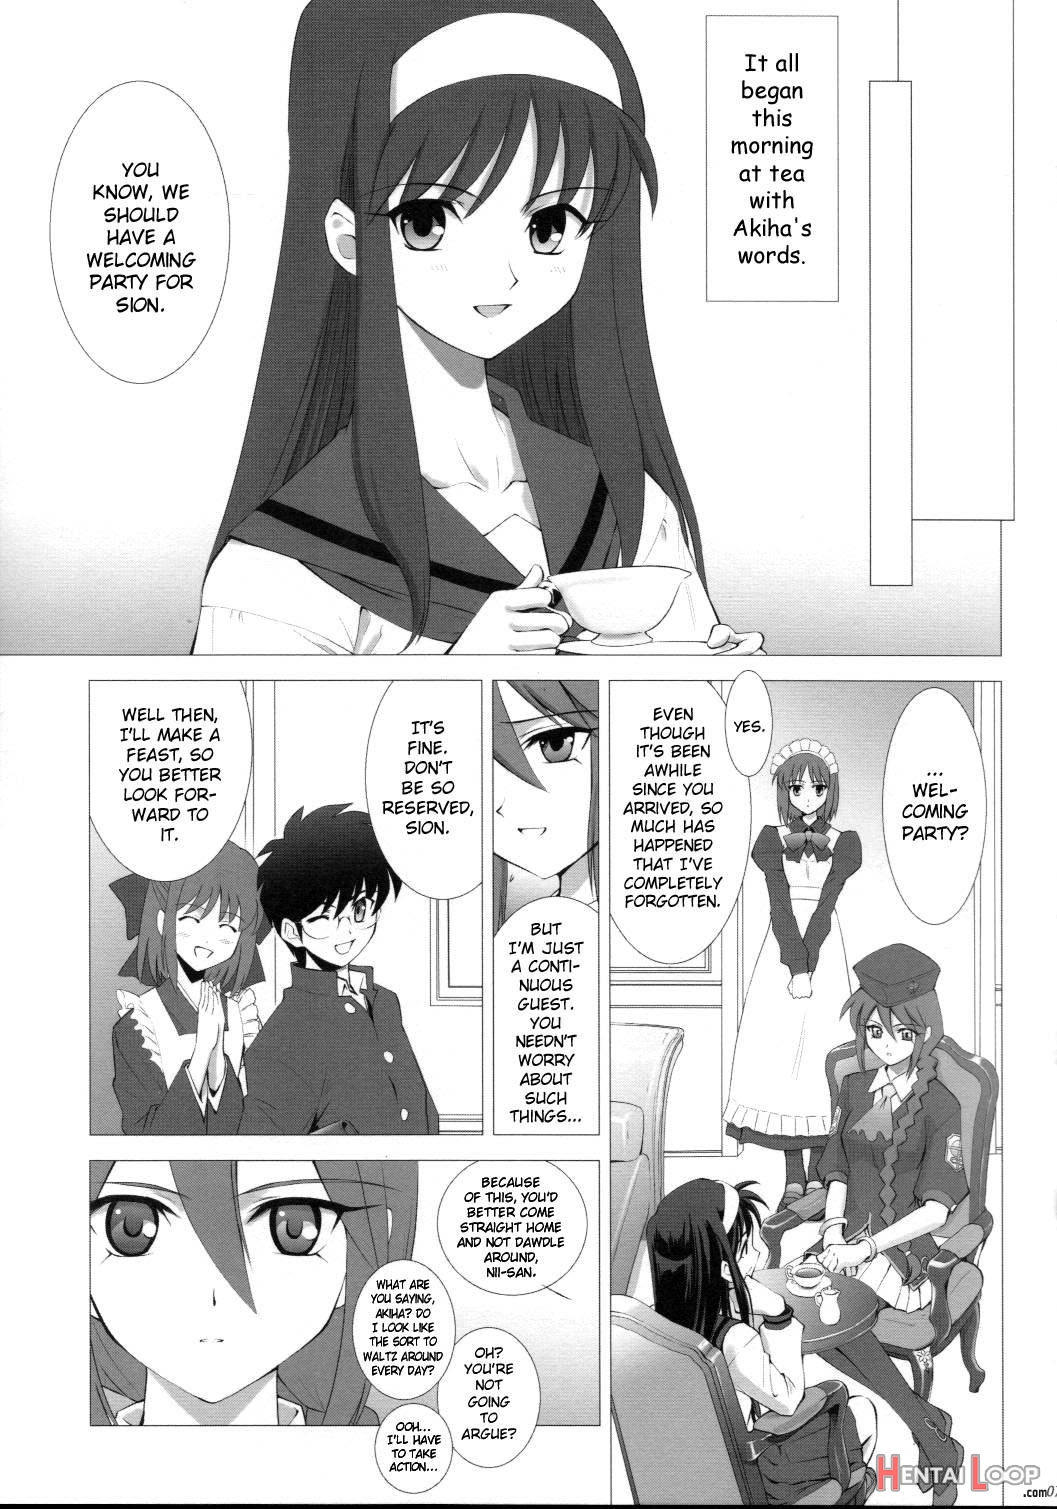 Tsukihime Complex 3 “red” page 6